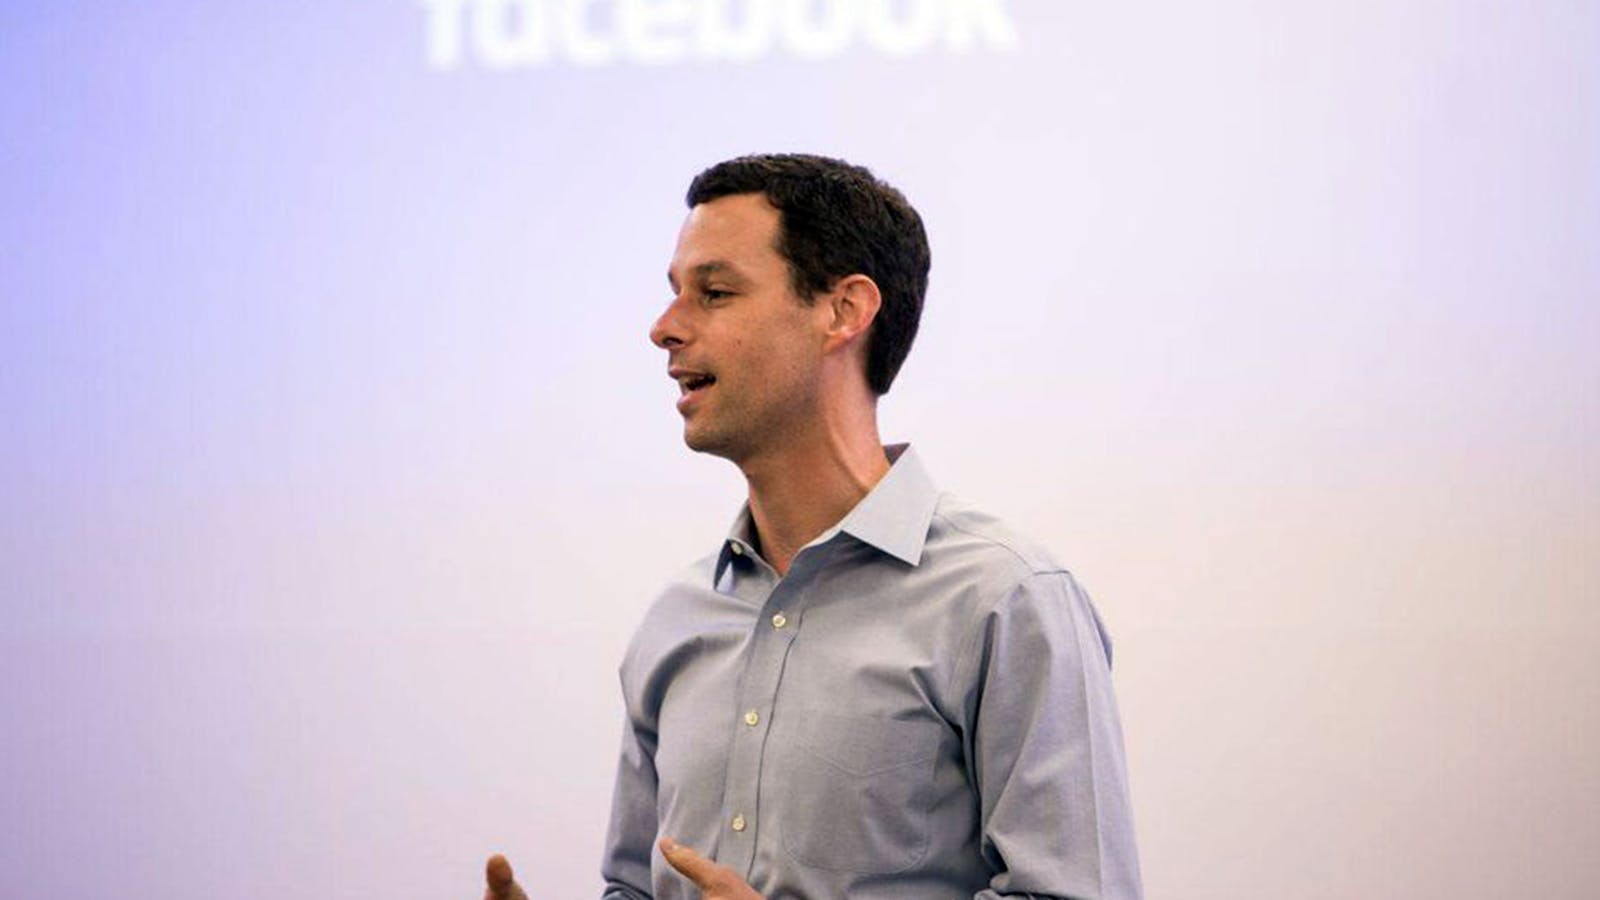 Facebook vice president Dan Levy has said the company is acquiring Kustomer because more businesses are interacting with their customers on Facebook apps. Photo courtesy of Facebook.